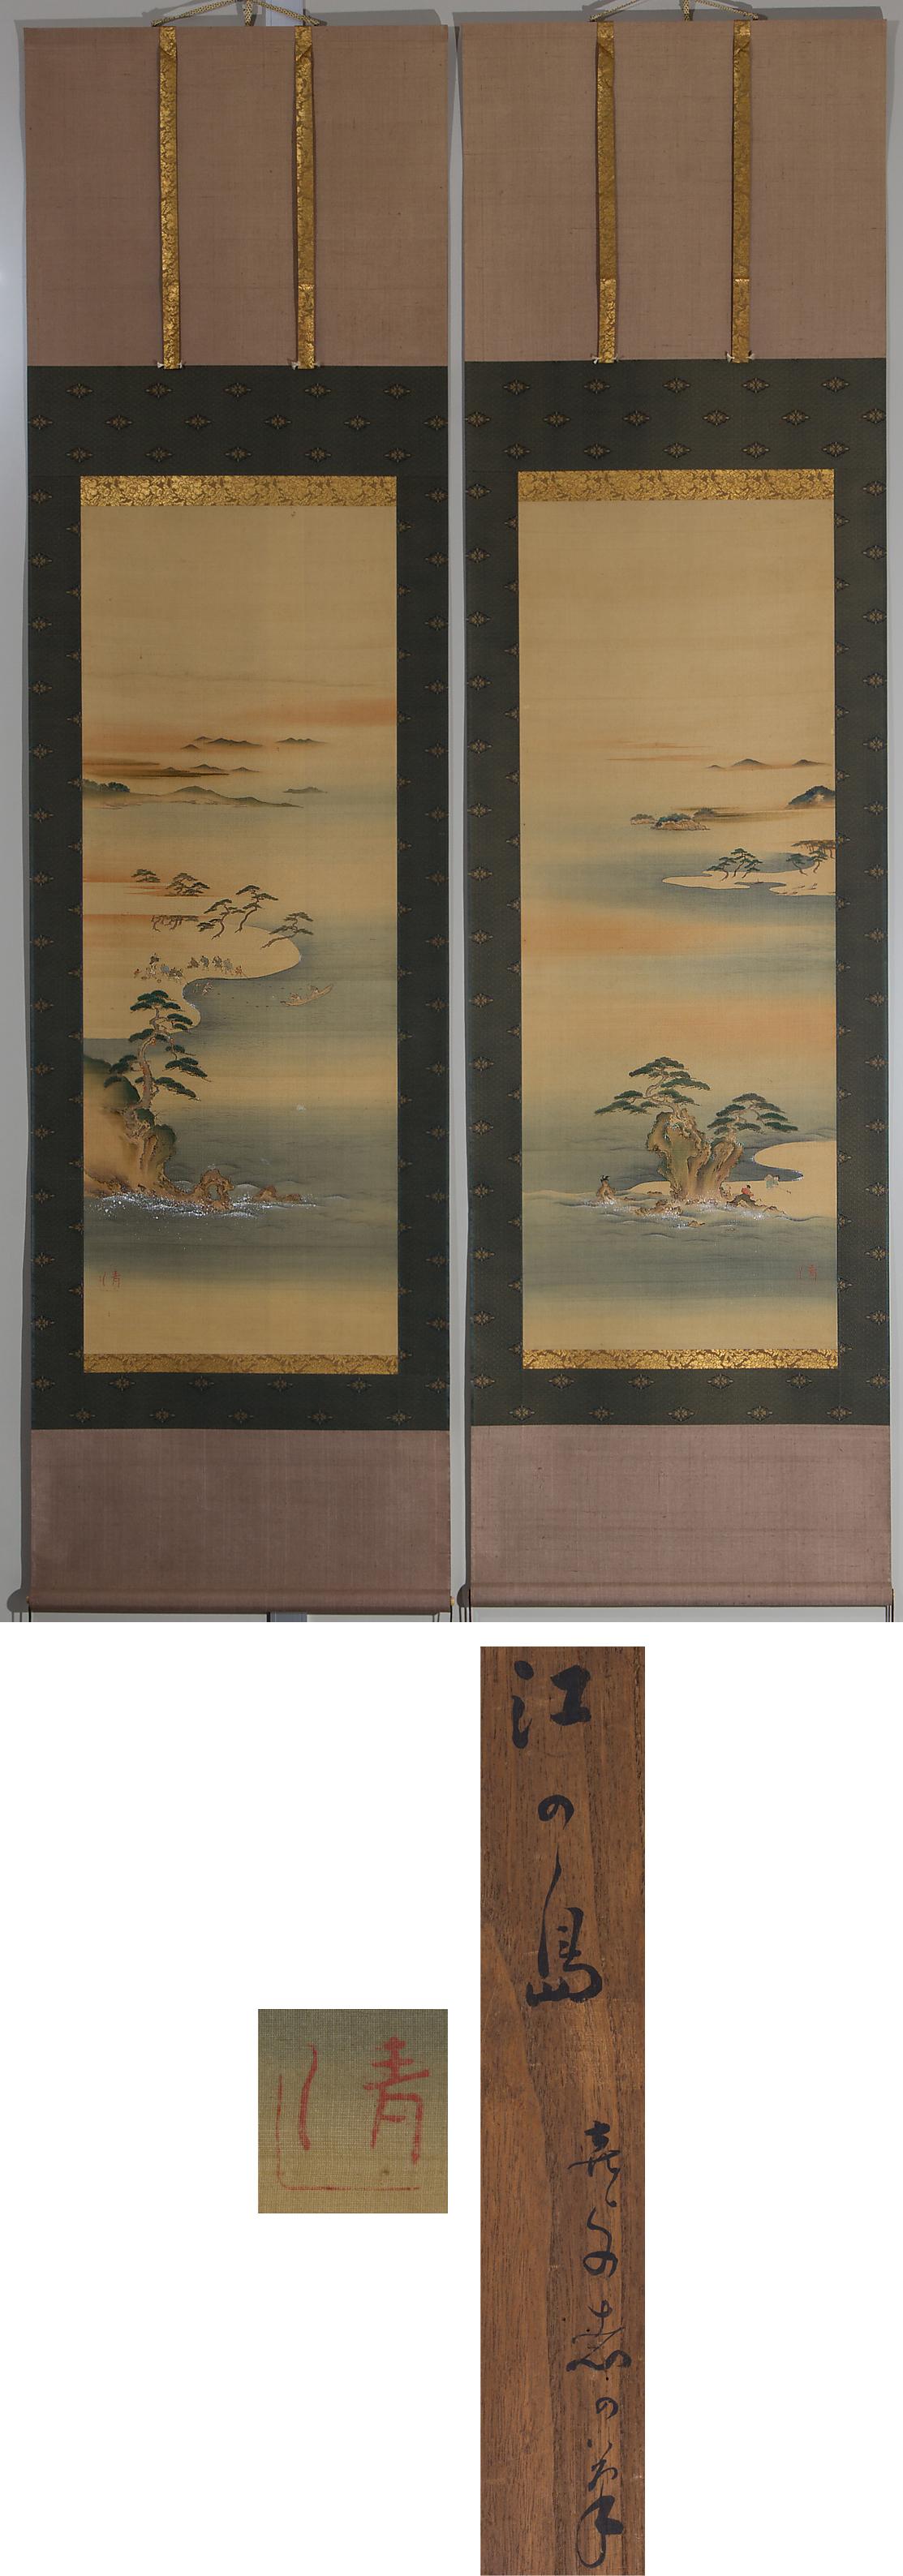 Silk Lovely Early 20th Century Scroll Paintings Japan Artist Signed Landscape Pair